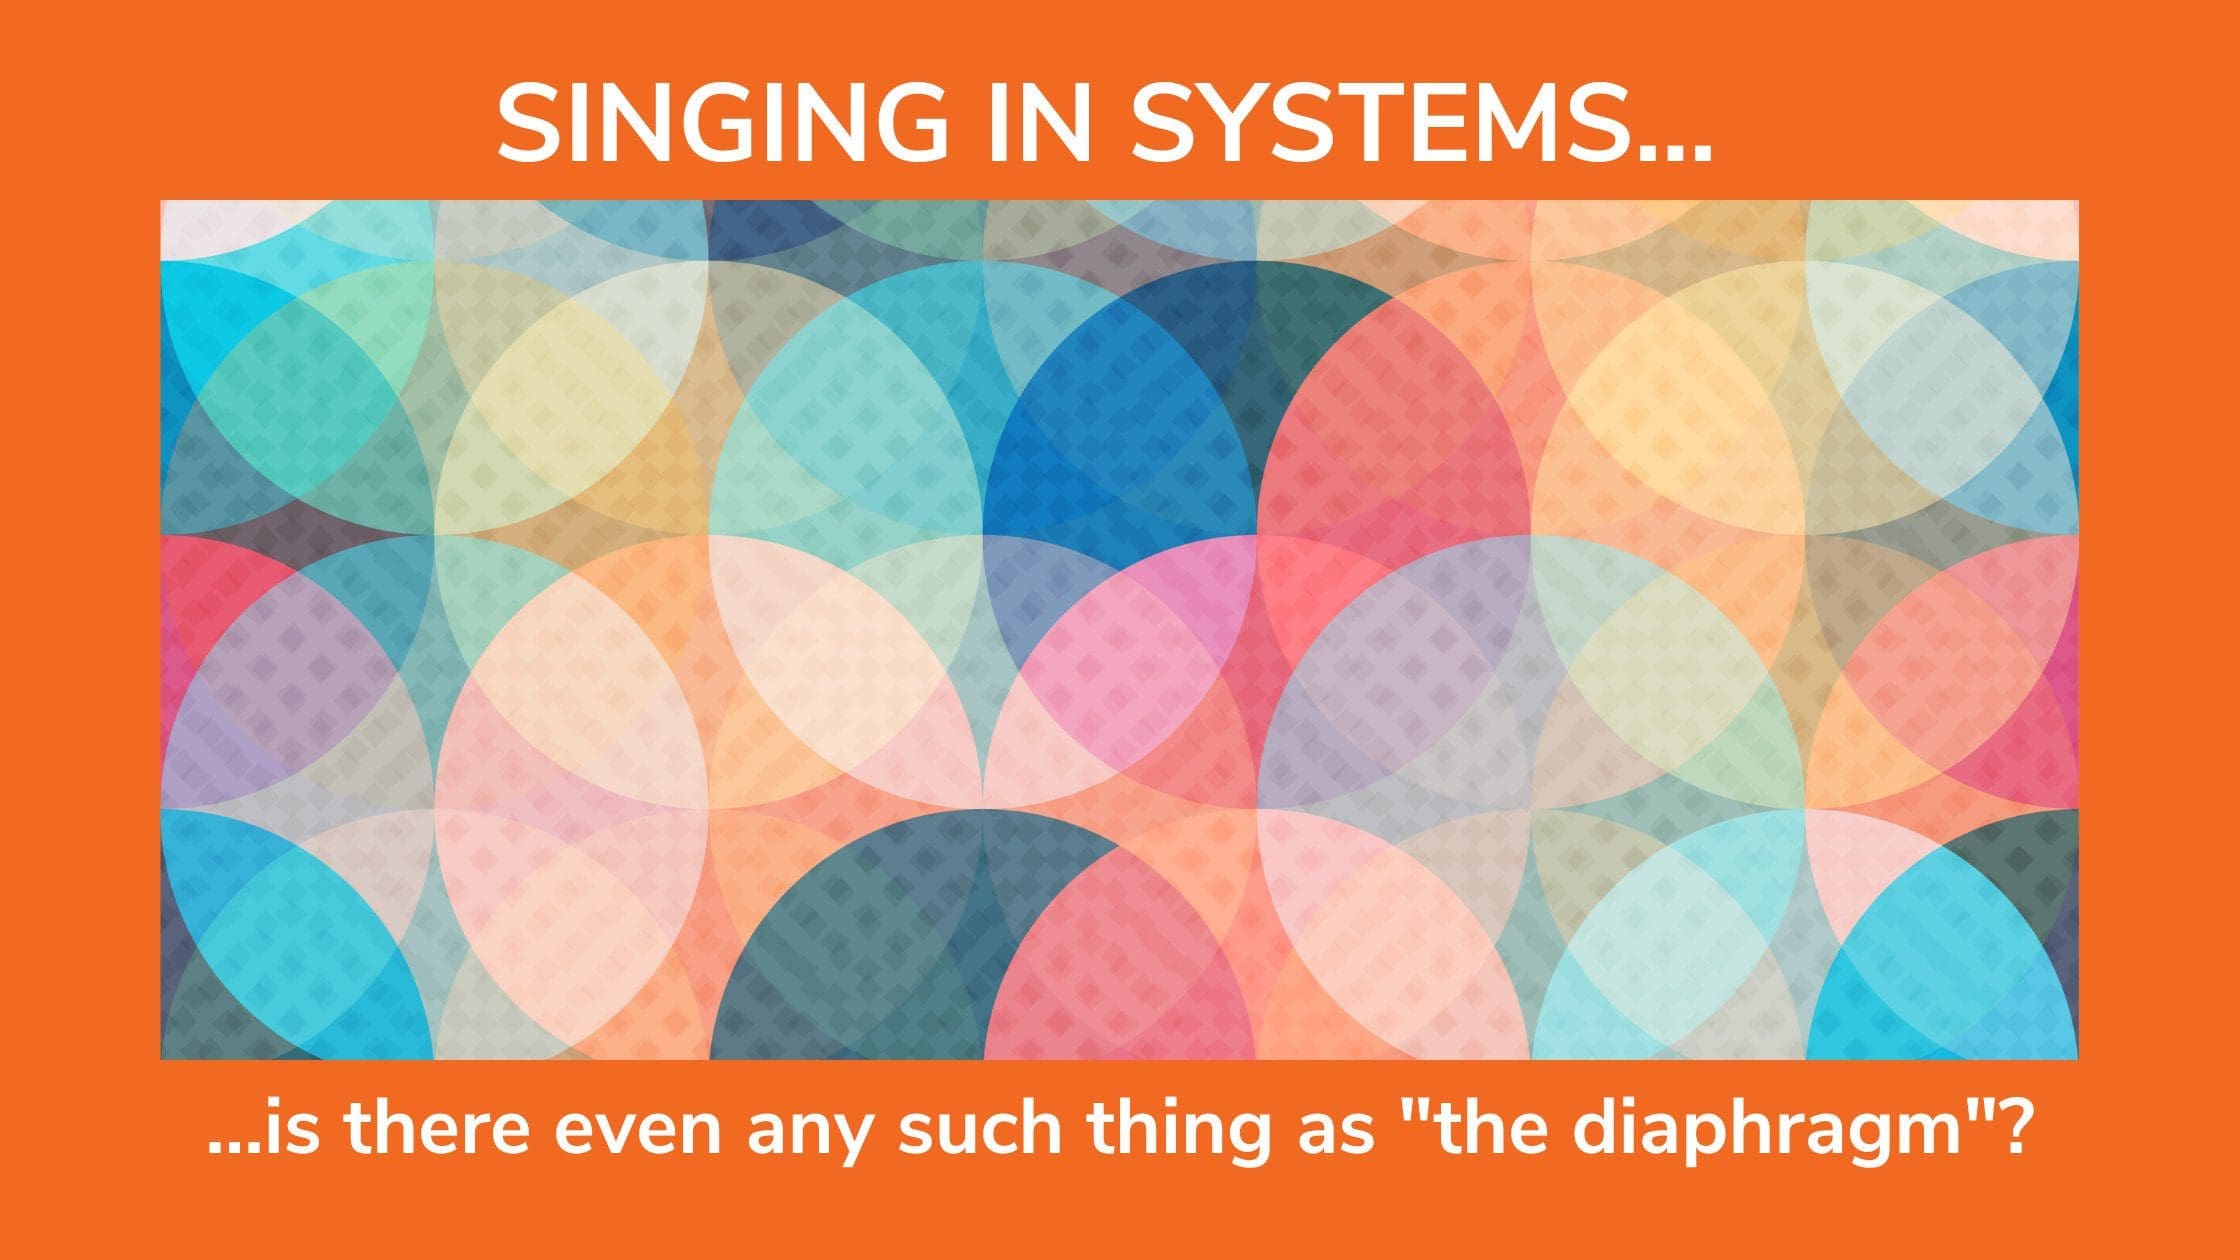 A series of overlapping colorful circles represent the blog "Singing in Systems - is there even any such thing as the diaphragm?"